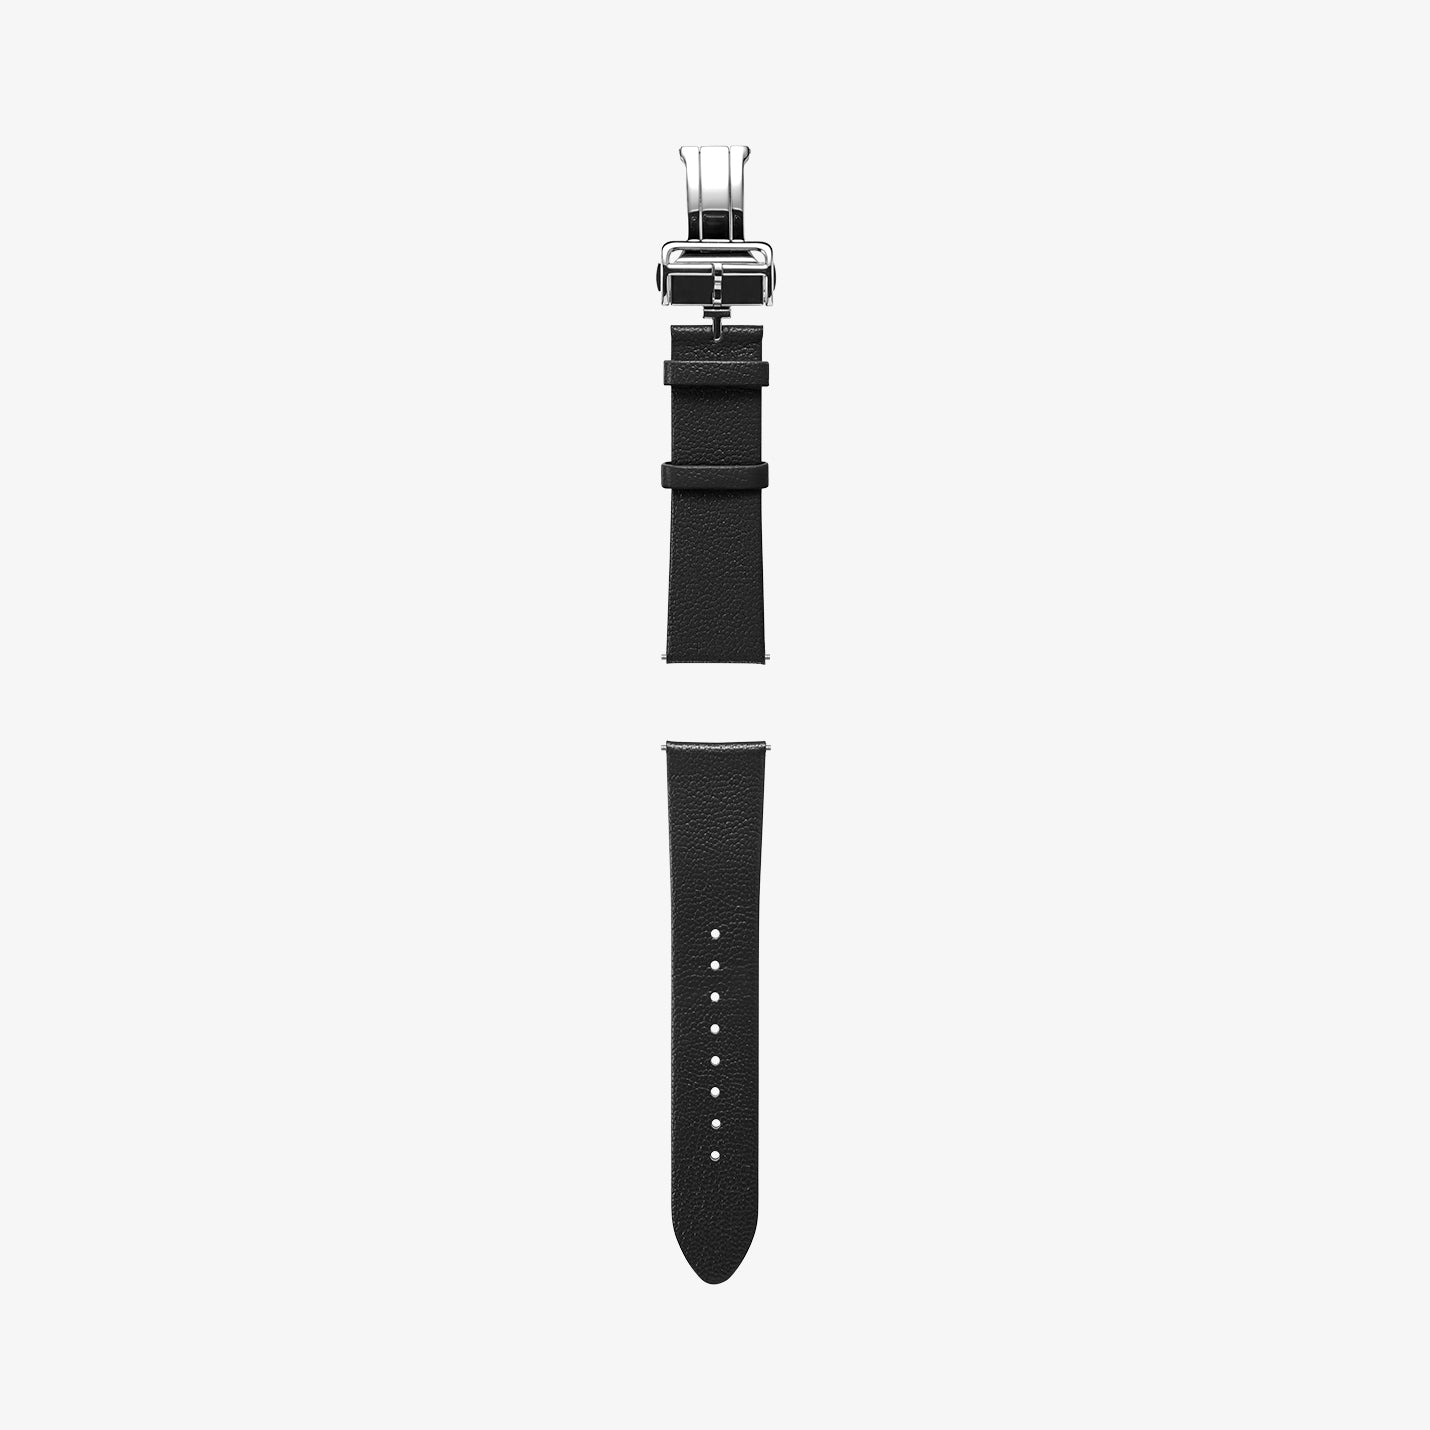 AMP06956 - Galaxy Watch Band Enzo (20mm) in black showing the two parts of watch band laid out flat